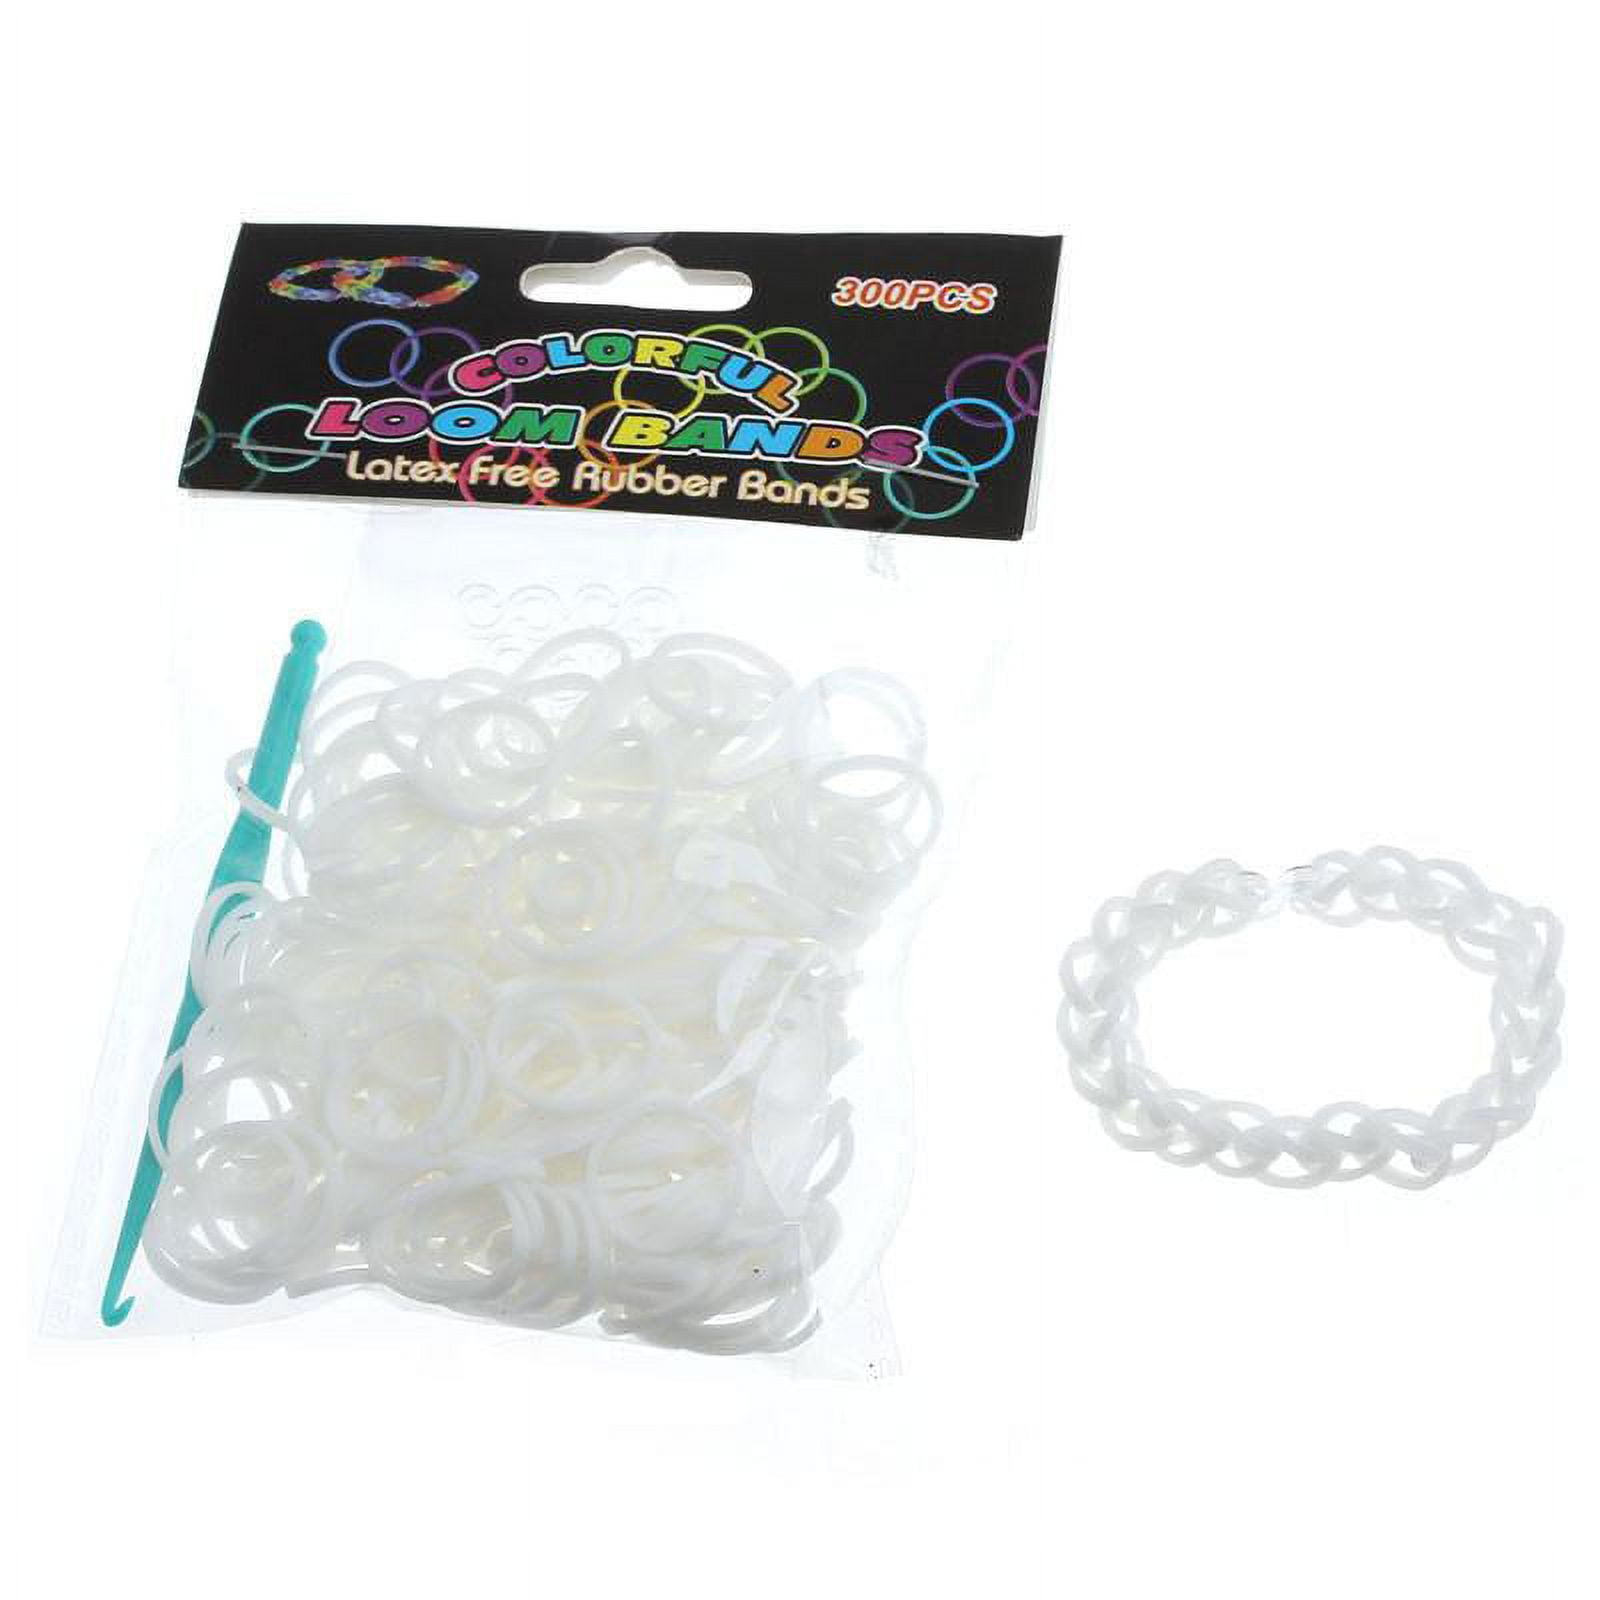 NOGIS 1200pcs S Clips for Rubber Band Bracelets, Colorful and